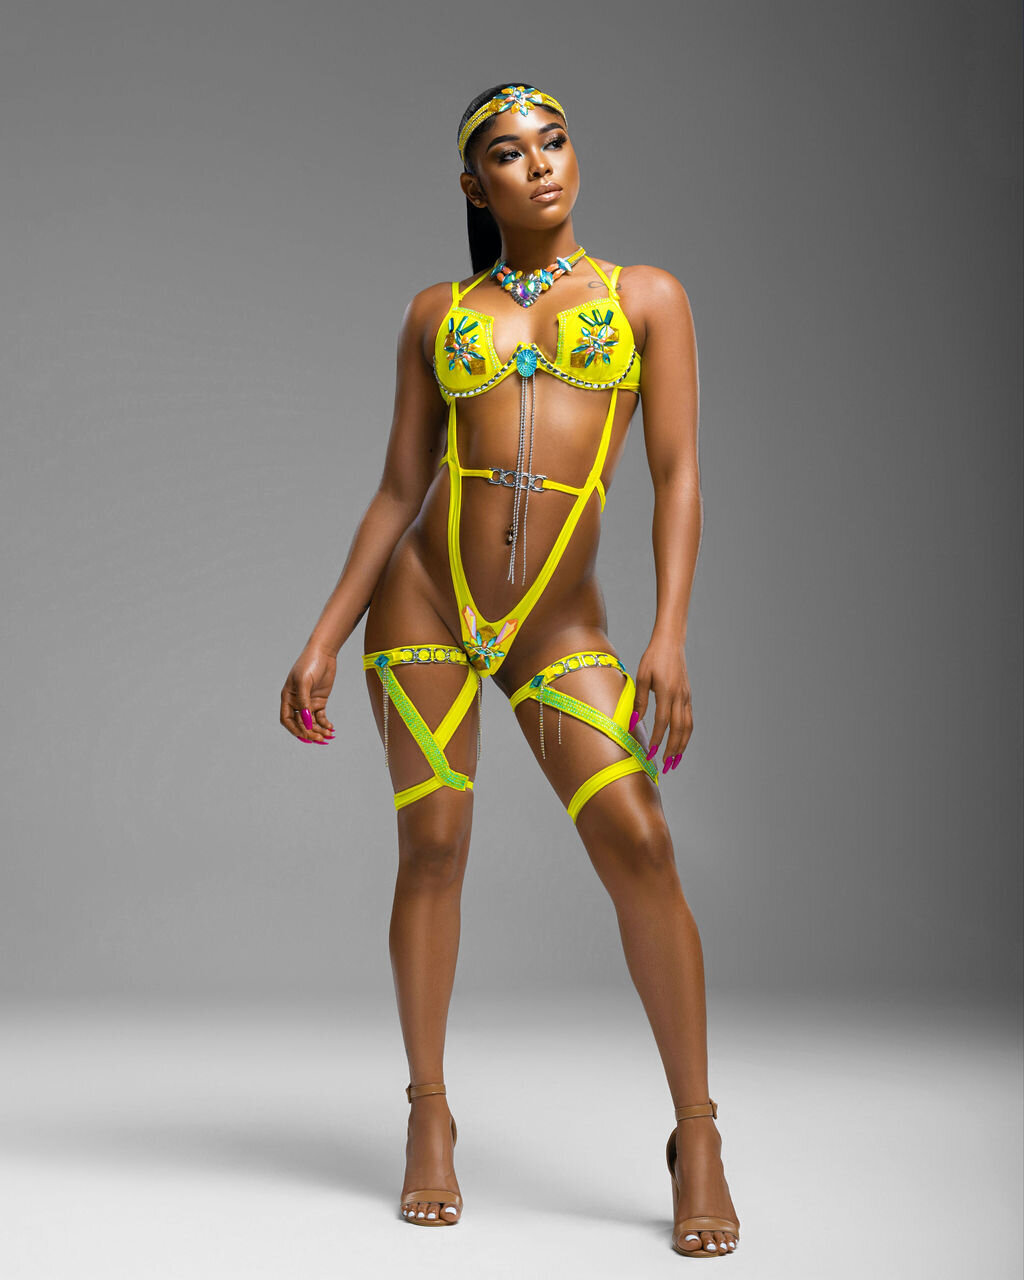 Yellow costume for Caribana Toronto. Register to play mas with Sunlime Mas